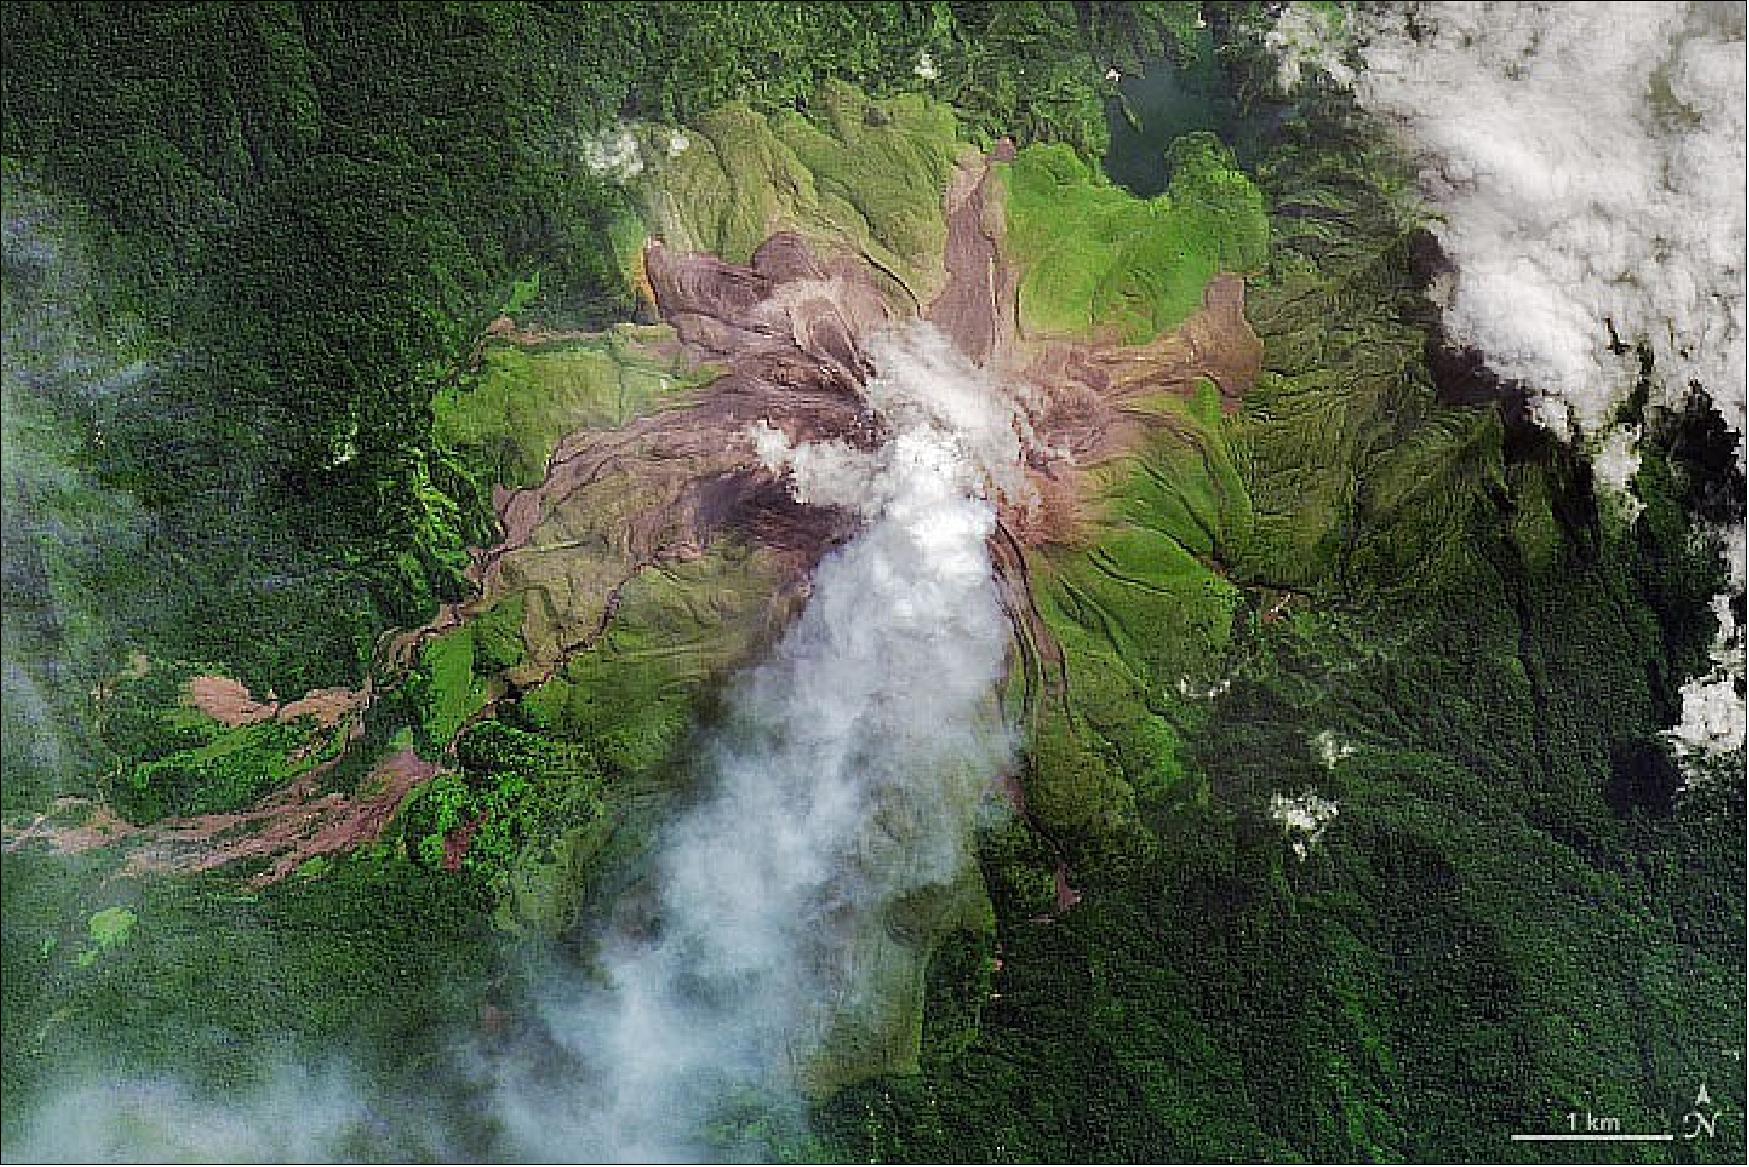 Figure 24: Recent lava flows are visible in this image acquired on May 28, 2022, by the Operational Land Imager-2 (OLI-2) on Landsat 9. The fresh lava is dark brown, while lighter brown areas were likely stripped of vegetation by volcanic debris or acidic gases. Older lava flows are covered in light green vegetation, and the surrounding forests are dark green. The volcanic plume, as well as some nearby clouds, are white (image credit: NASA Earth Observatory image by Joshua Stevens, using Landsat data from the U.S. Geological Survey. Story by Sara E. Pratt)